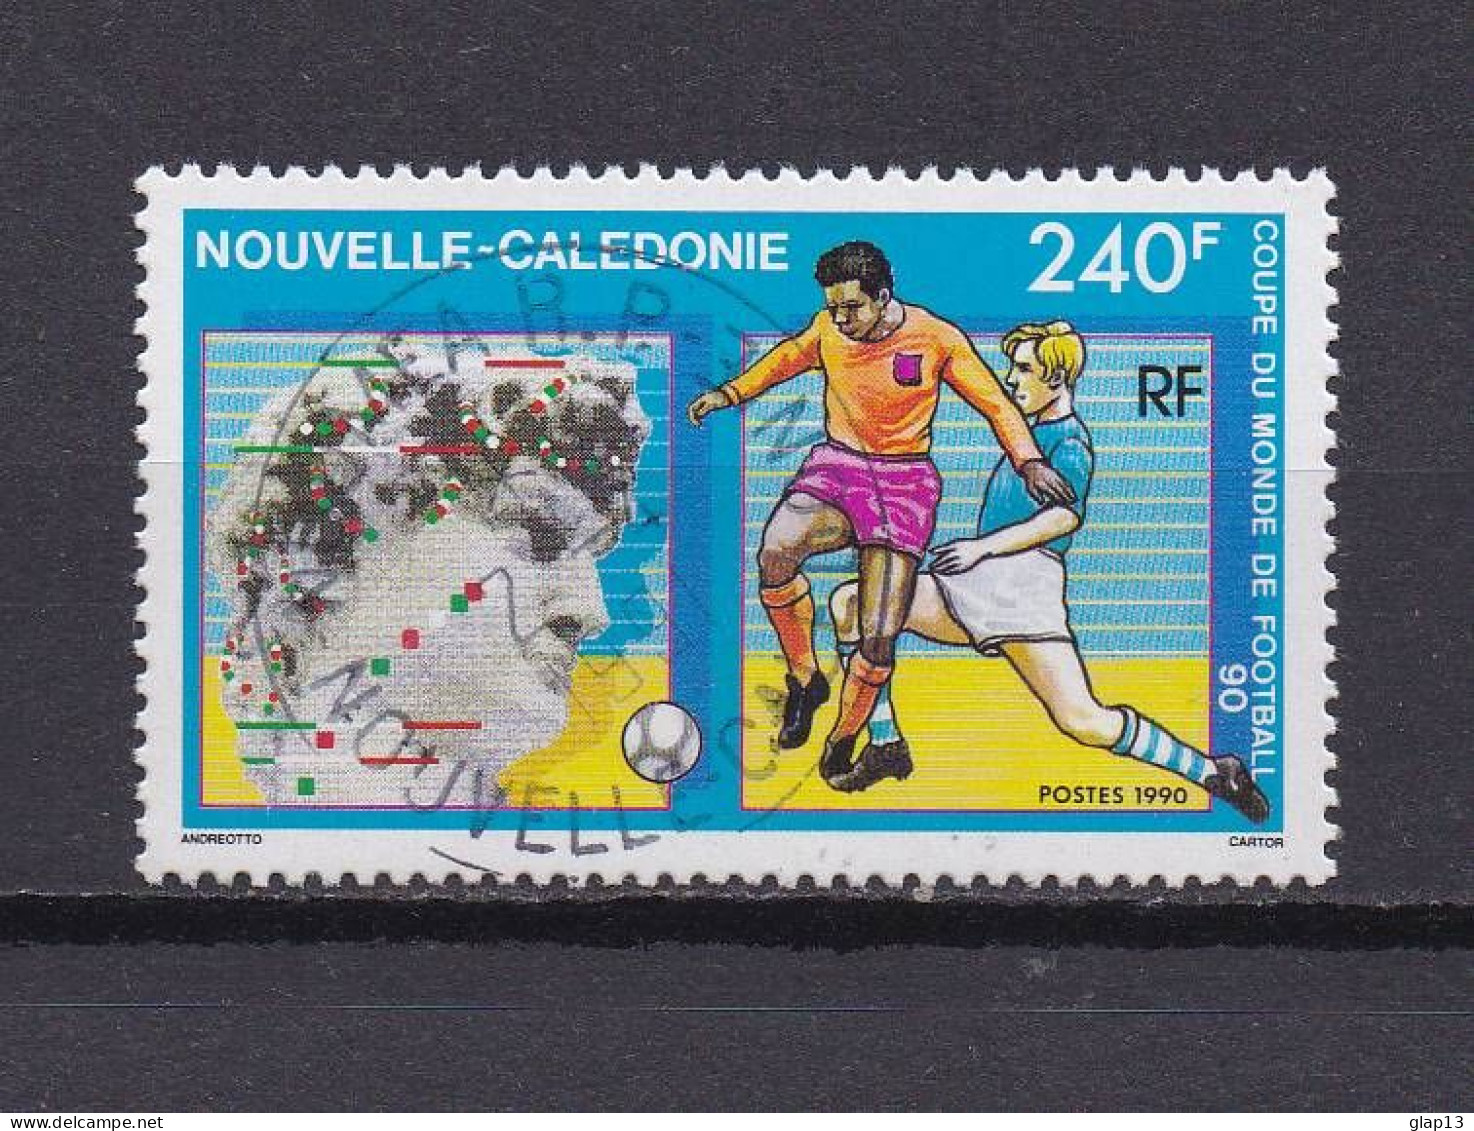 NOUVELLE-CALEDONIE 1990 TIMBRE N°596 OBLITERE FOOTBALL - Usados